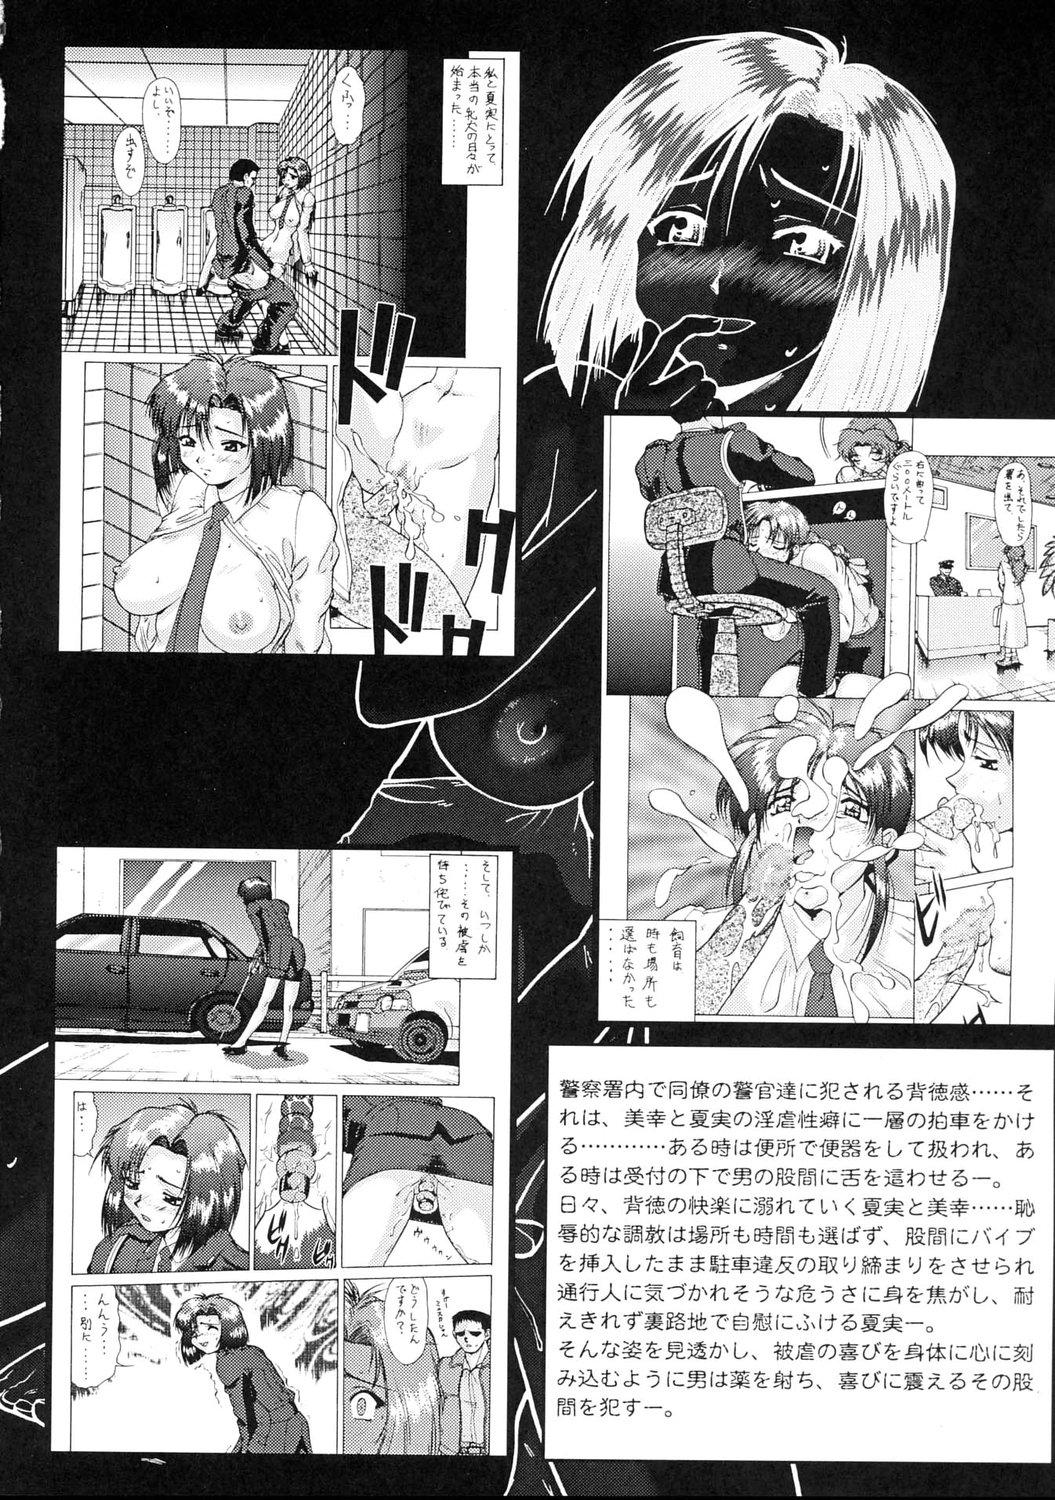 Ass Sex Taiho Shichauzo The Doujin Vol. 5 - Youre under arrest Thai - Page 9